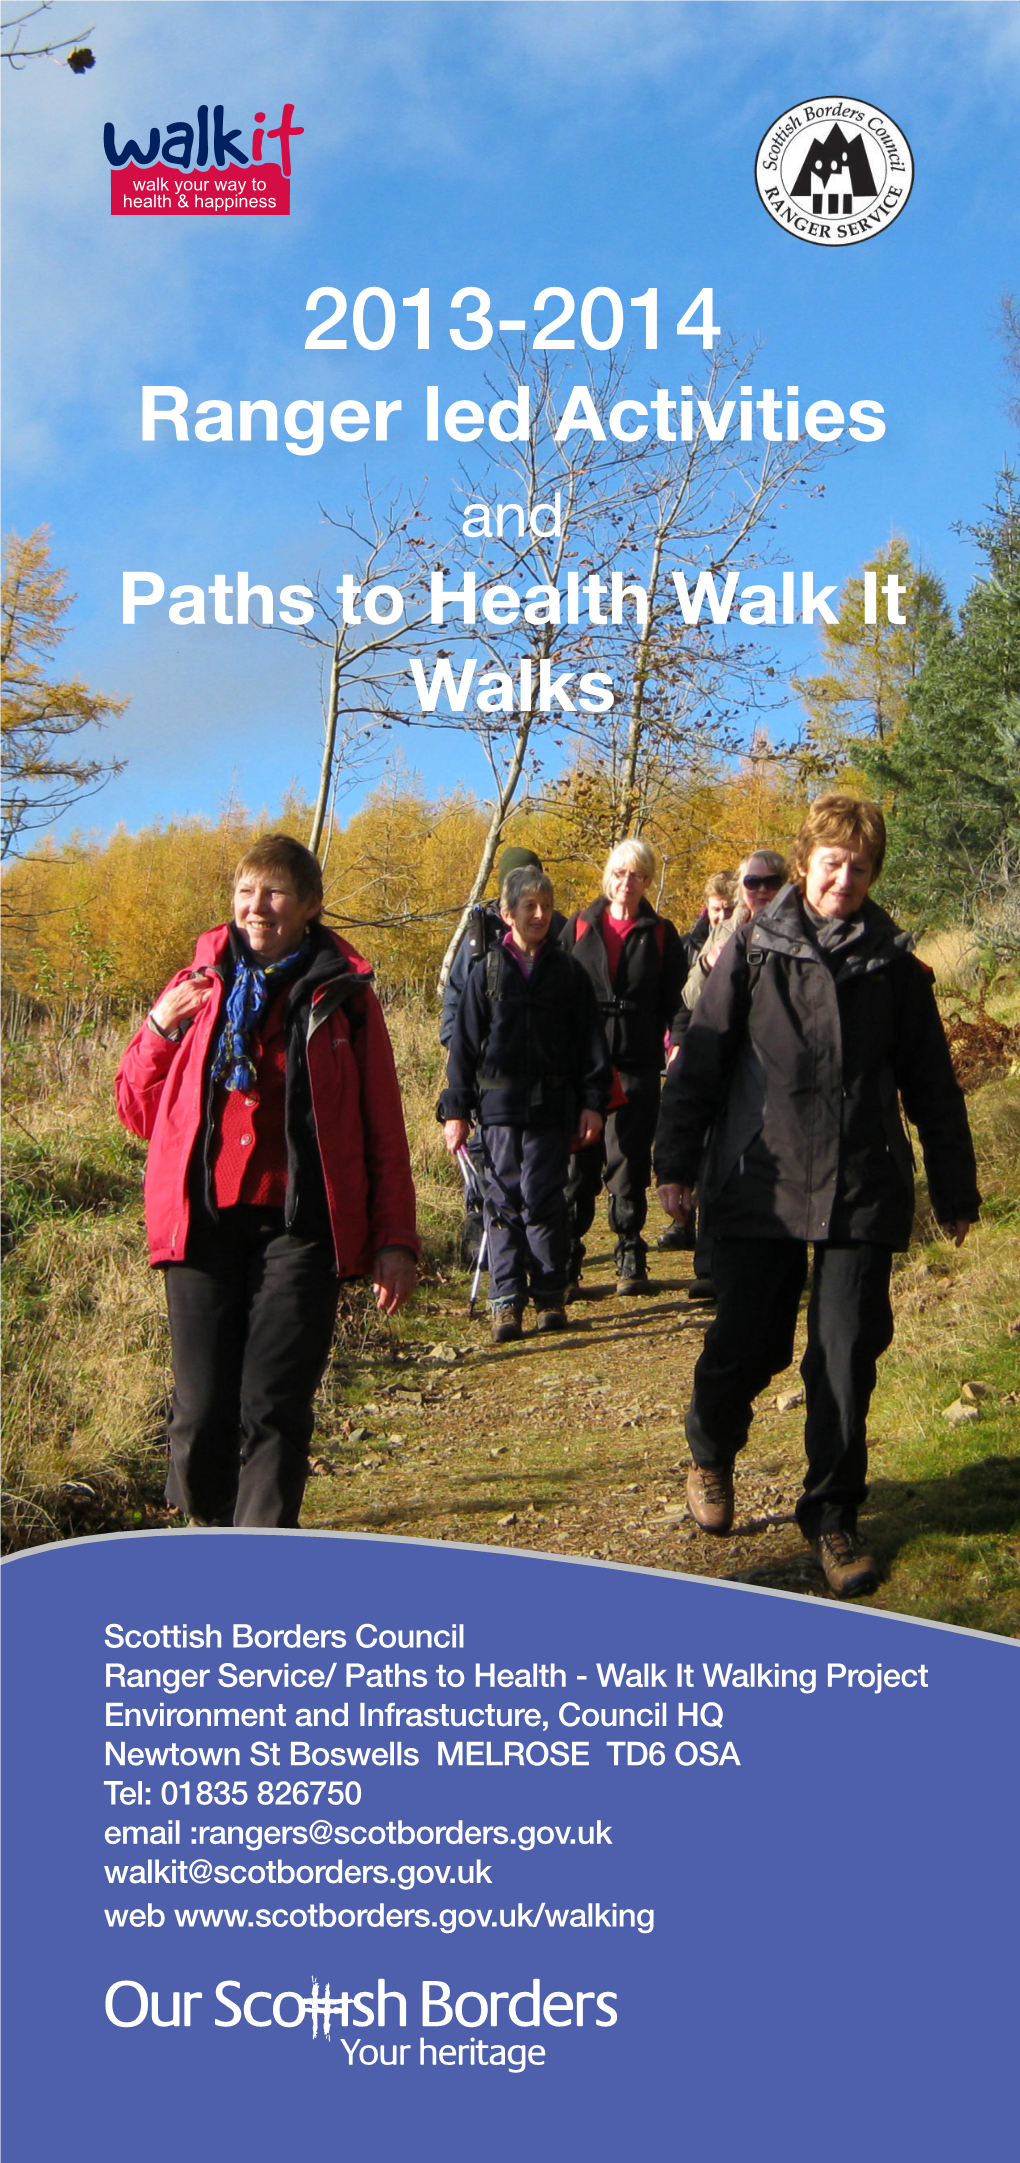 Ranger Led Activities and Paths to Health Walk It Walks